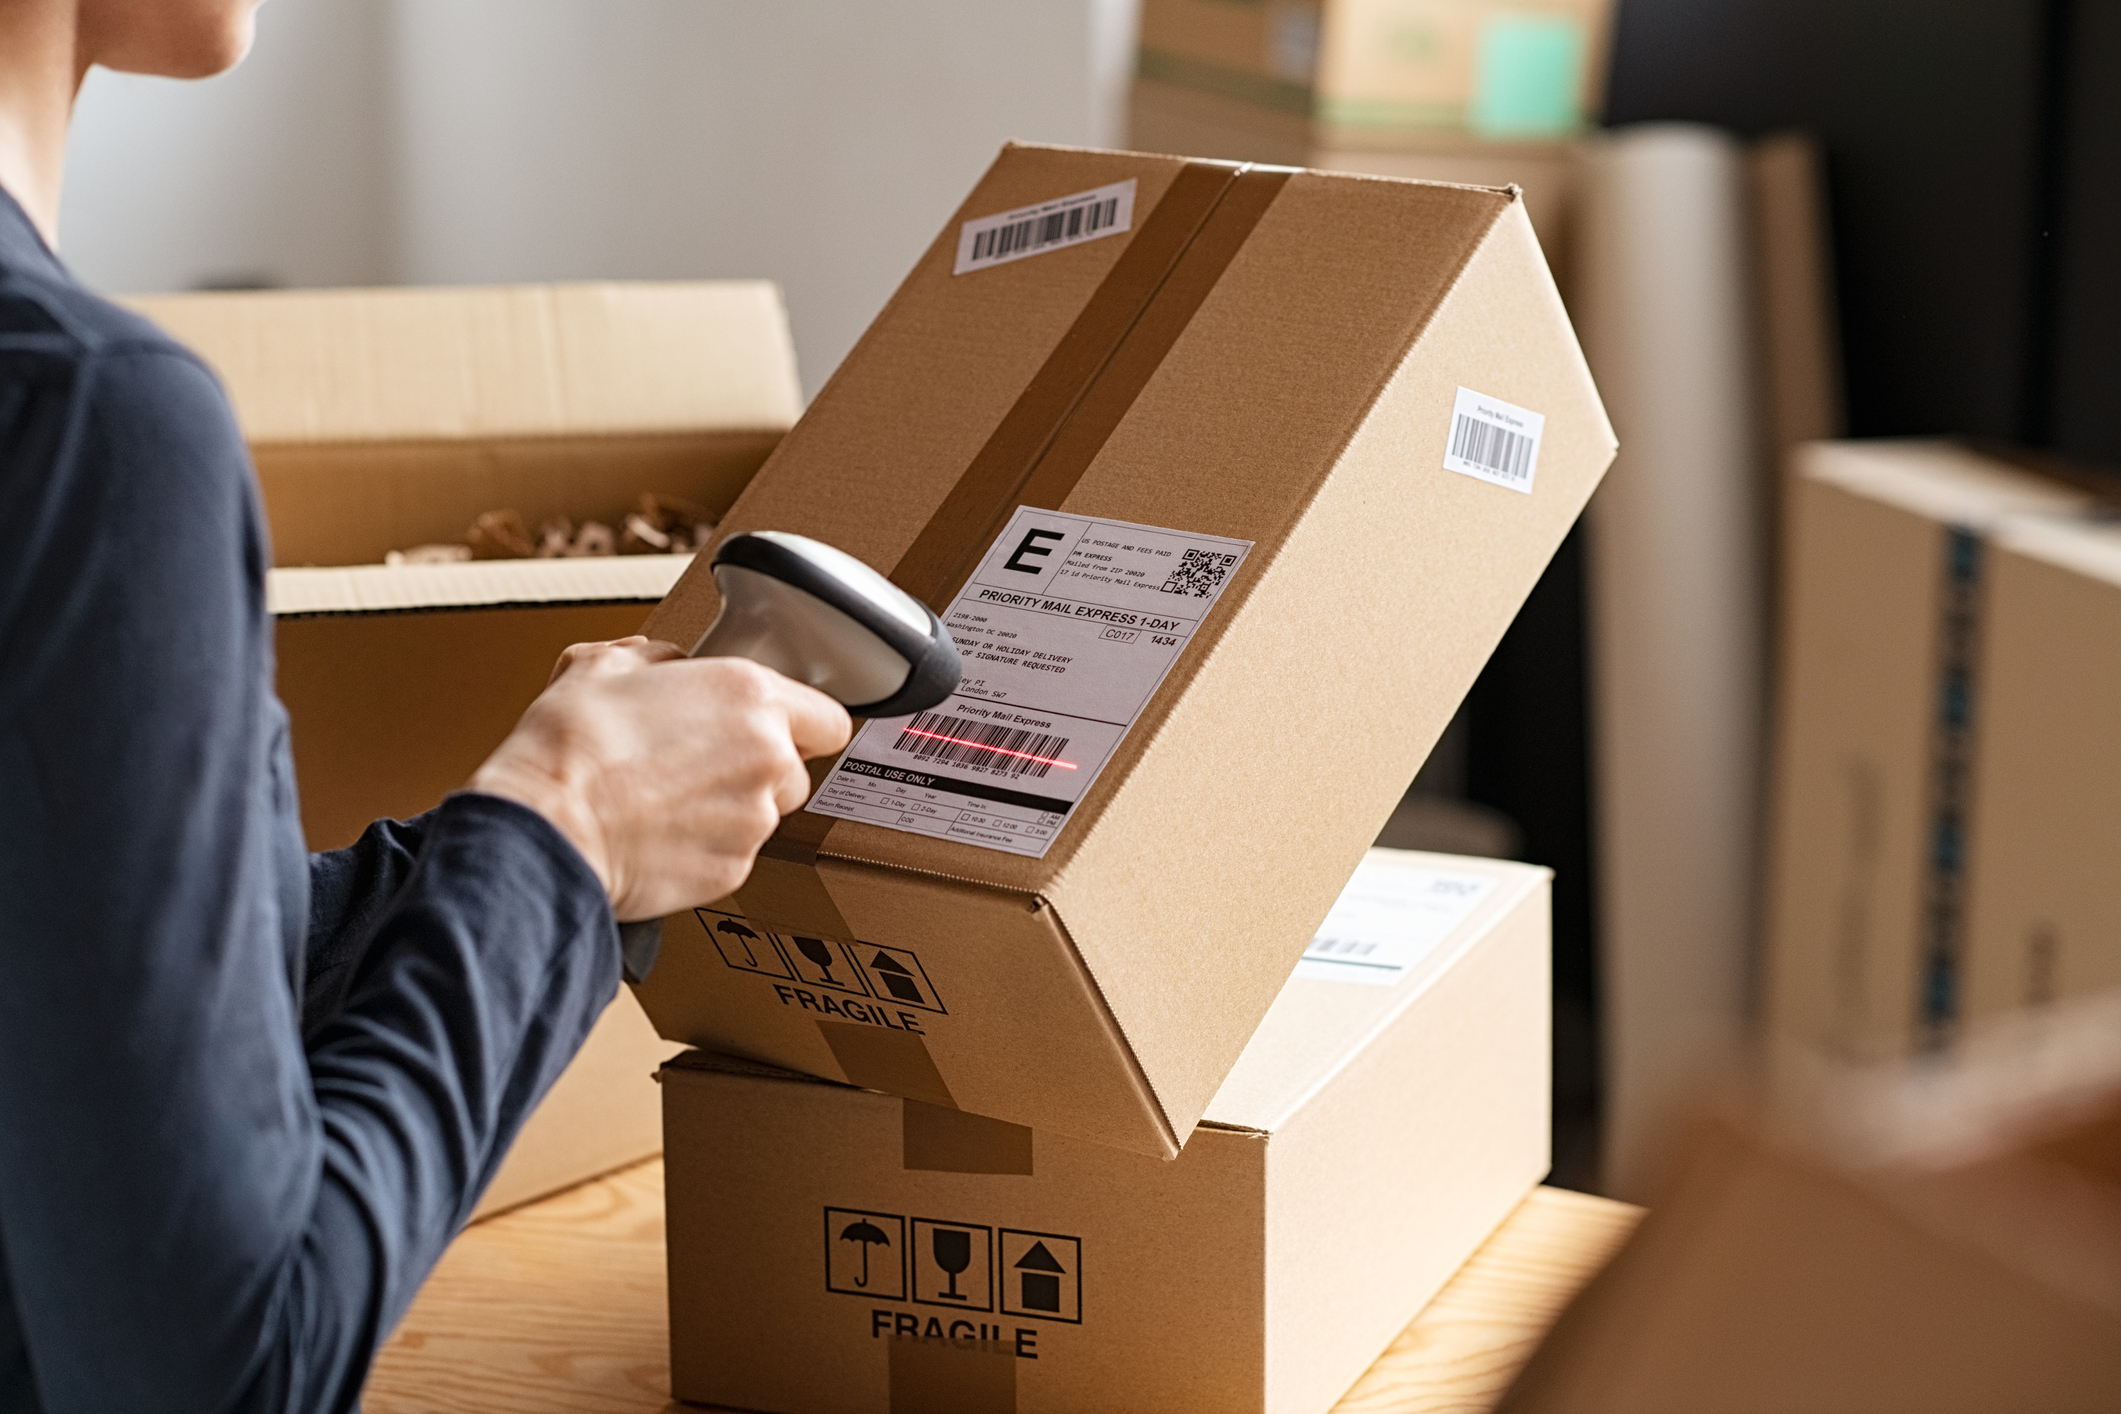 Woman scanning barcode on delivery parcel.